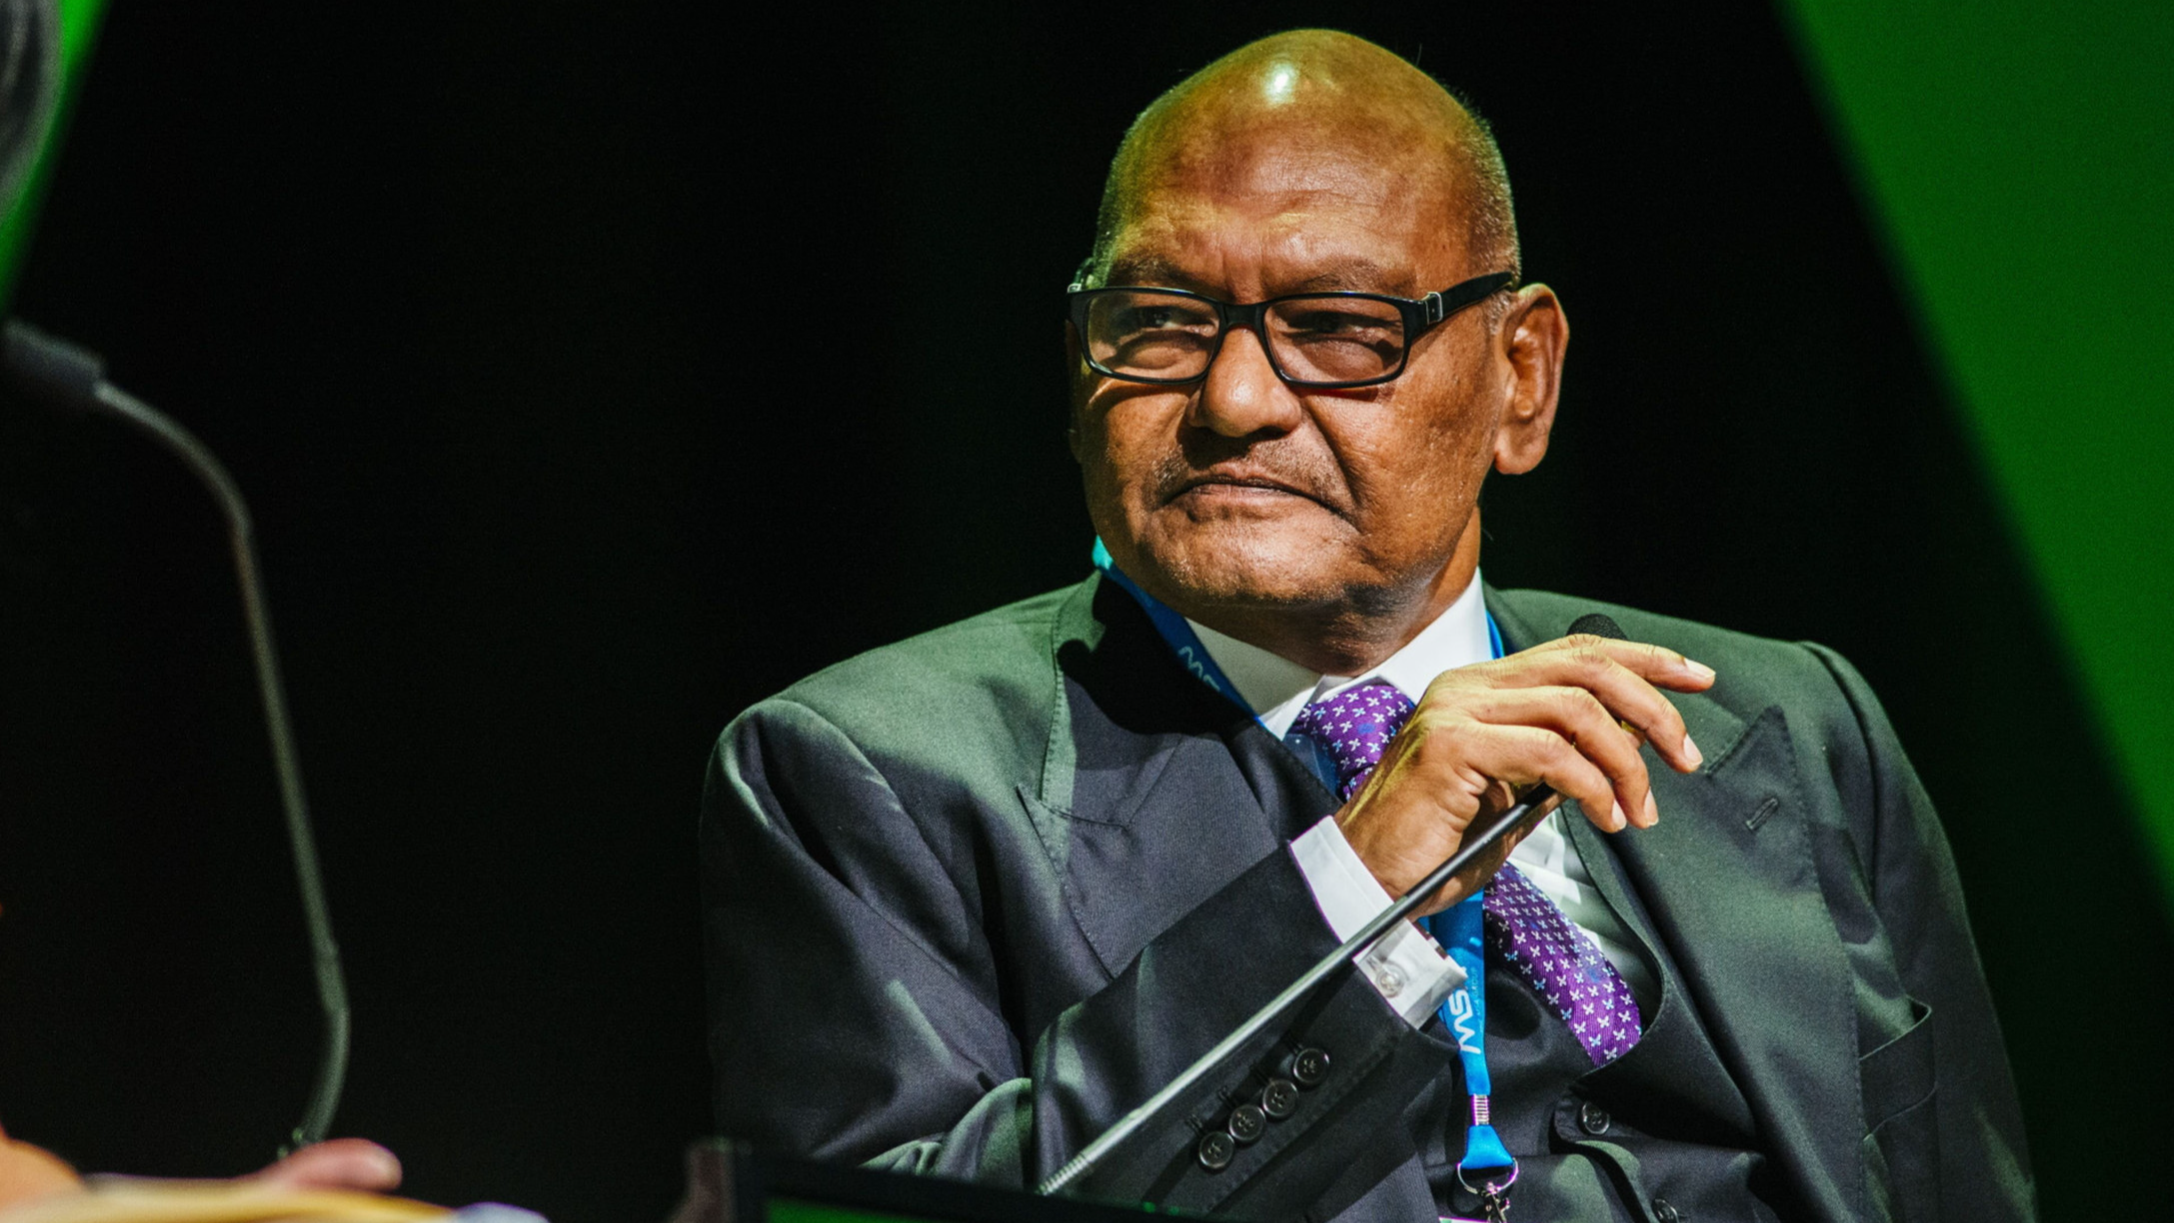 Semiconductor Dream Of Billionaire Anil Agarwal Is In Jeopardy As Barriers Such As A Lack Of Partners And Regulatory Restrictions Rise.